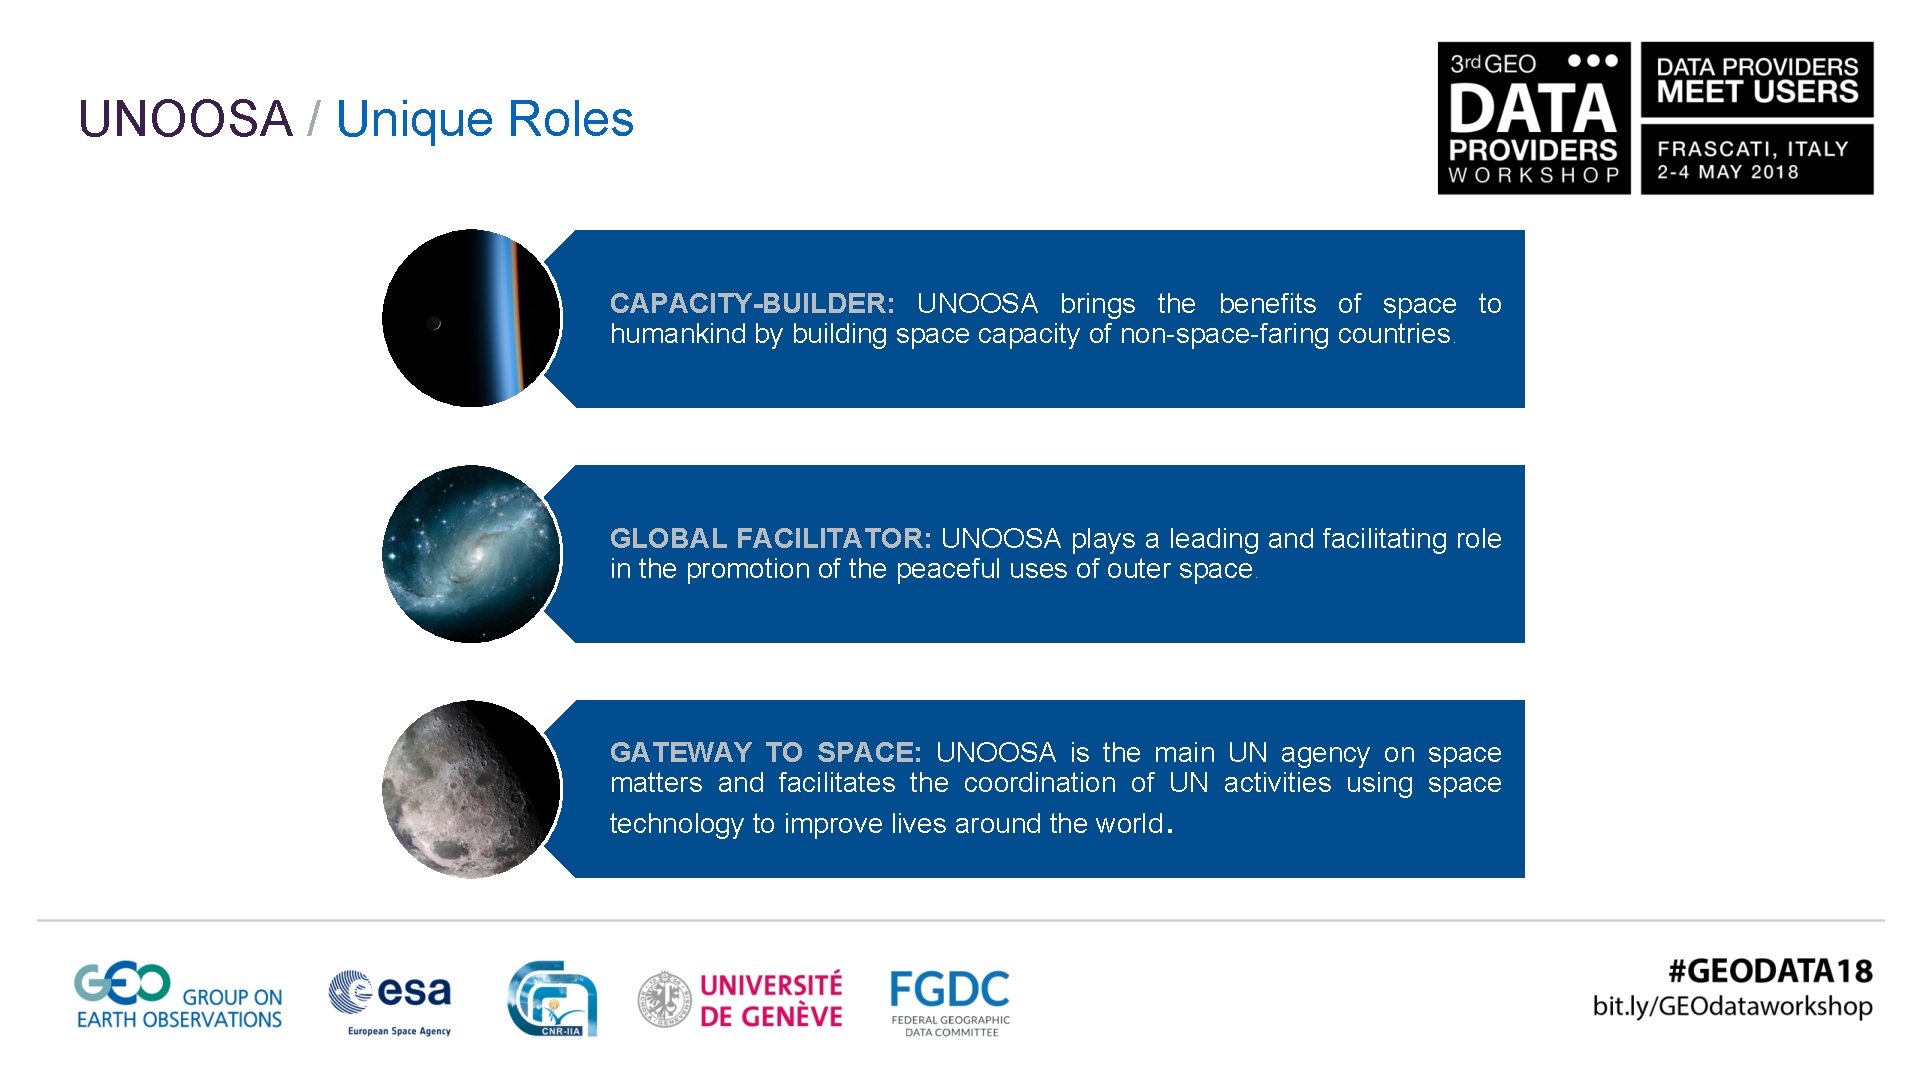 UNOOSA / Unique Roles CAPACITY-BUILDER: UNOOSA brings the benefits of space to humankind by